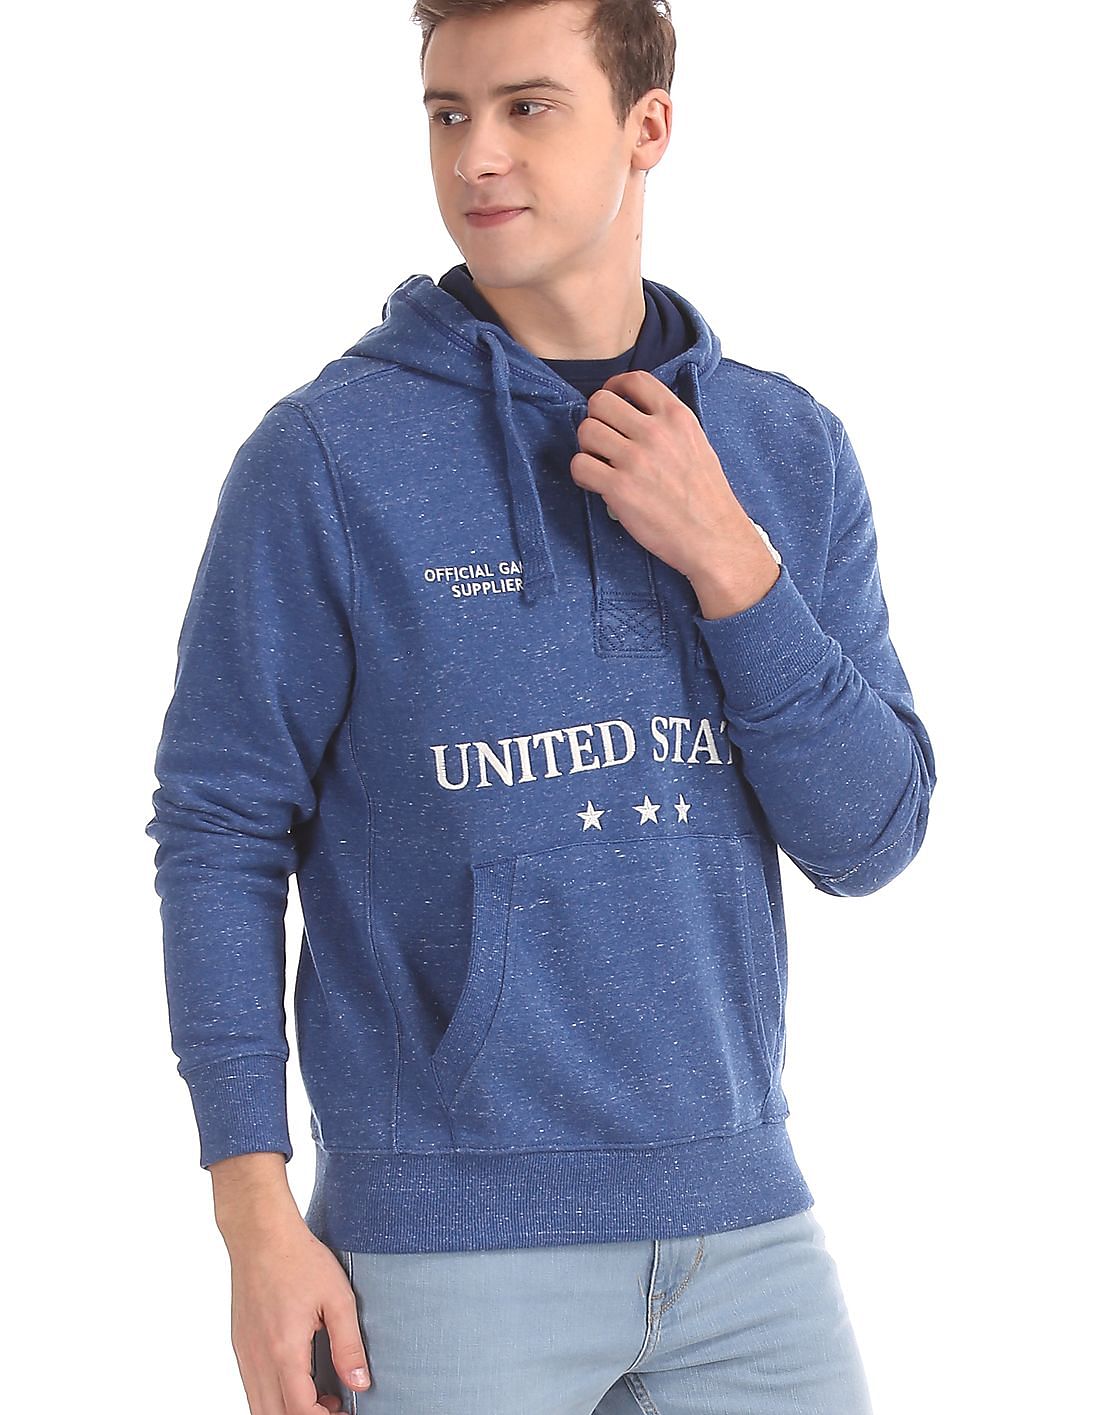 Buy Men Blue Embroidered Hooded Sweatshirt online at NNNOW.com